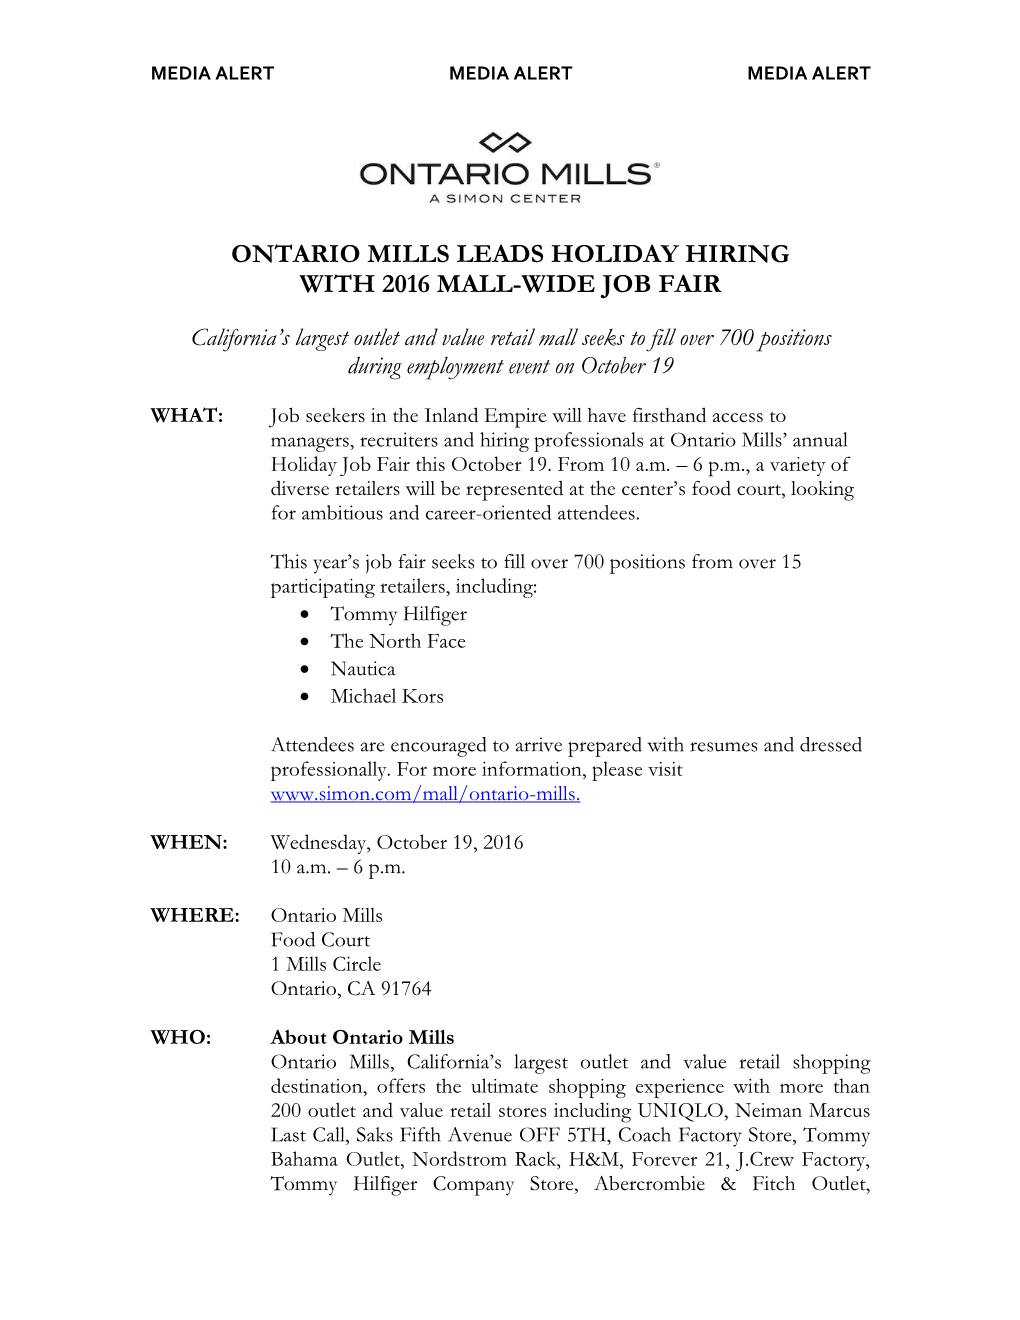 Ontario Mills Leads Holiday Hiring with 2016 Mall-Wide Job Fair